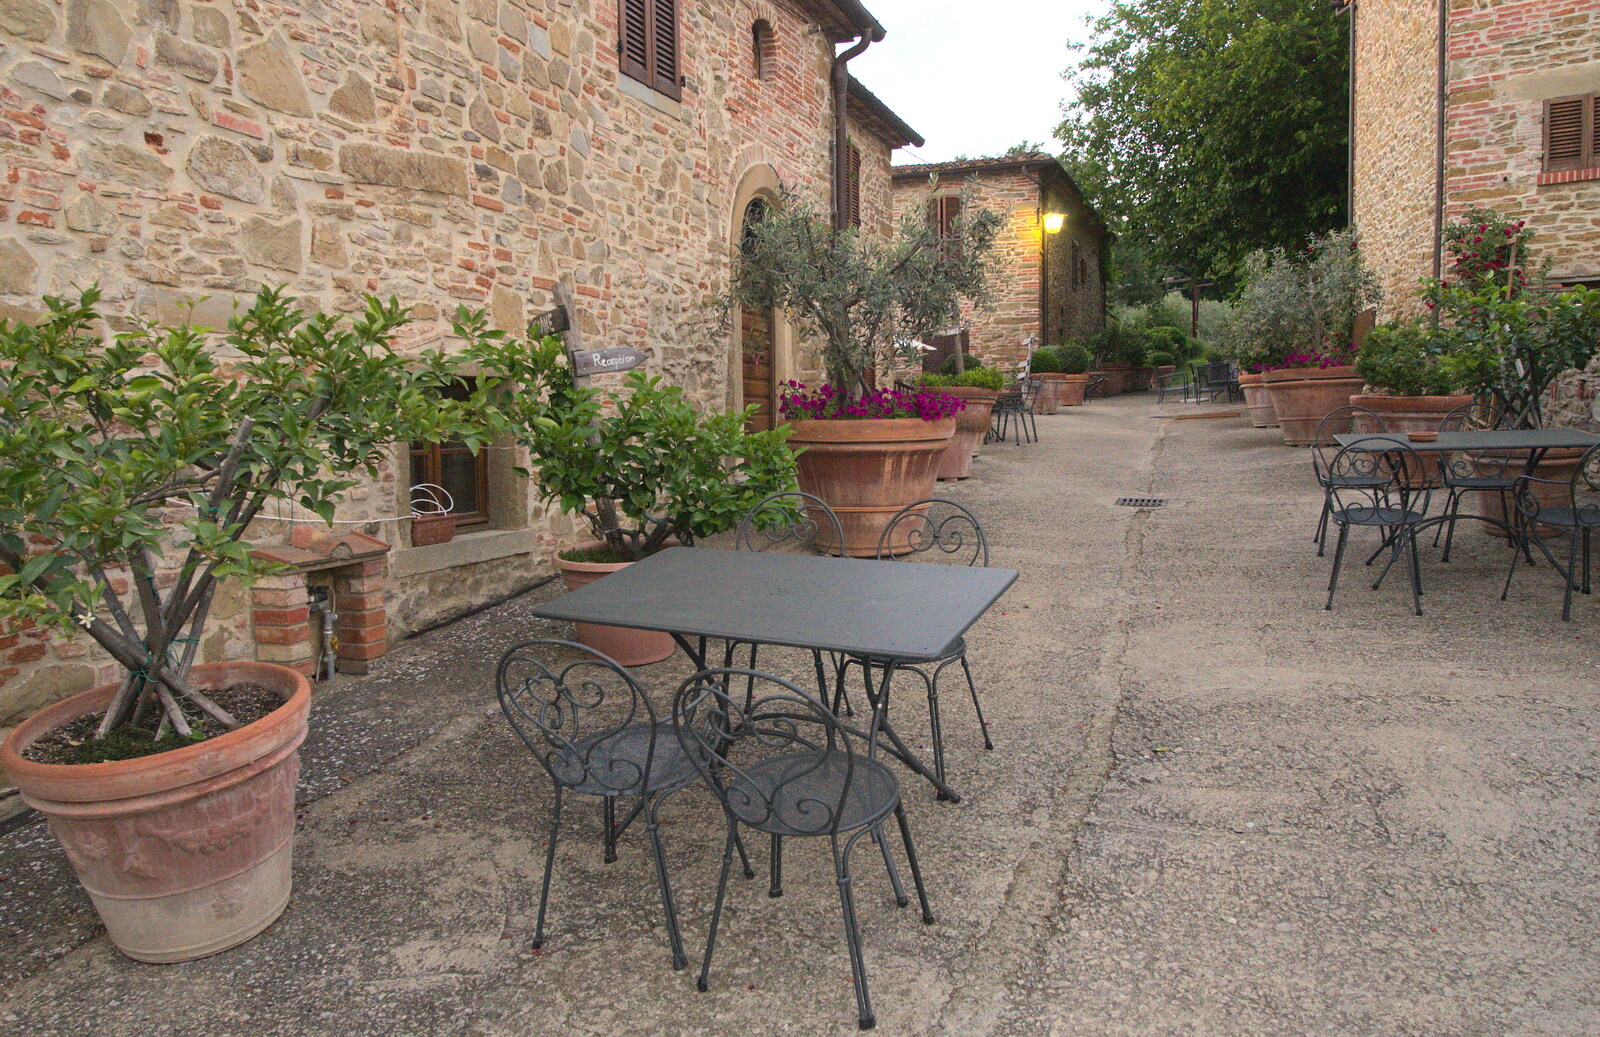 Garden benches from La Verna Monastery and the Fireflies of Tuscany, Italy - 14th June 2013